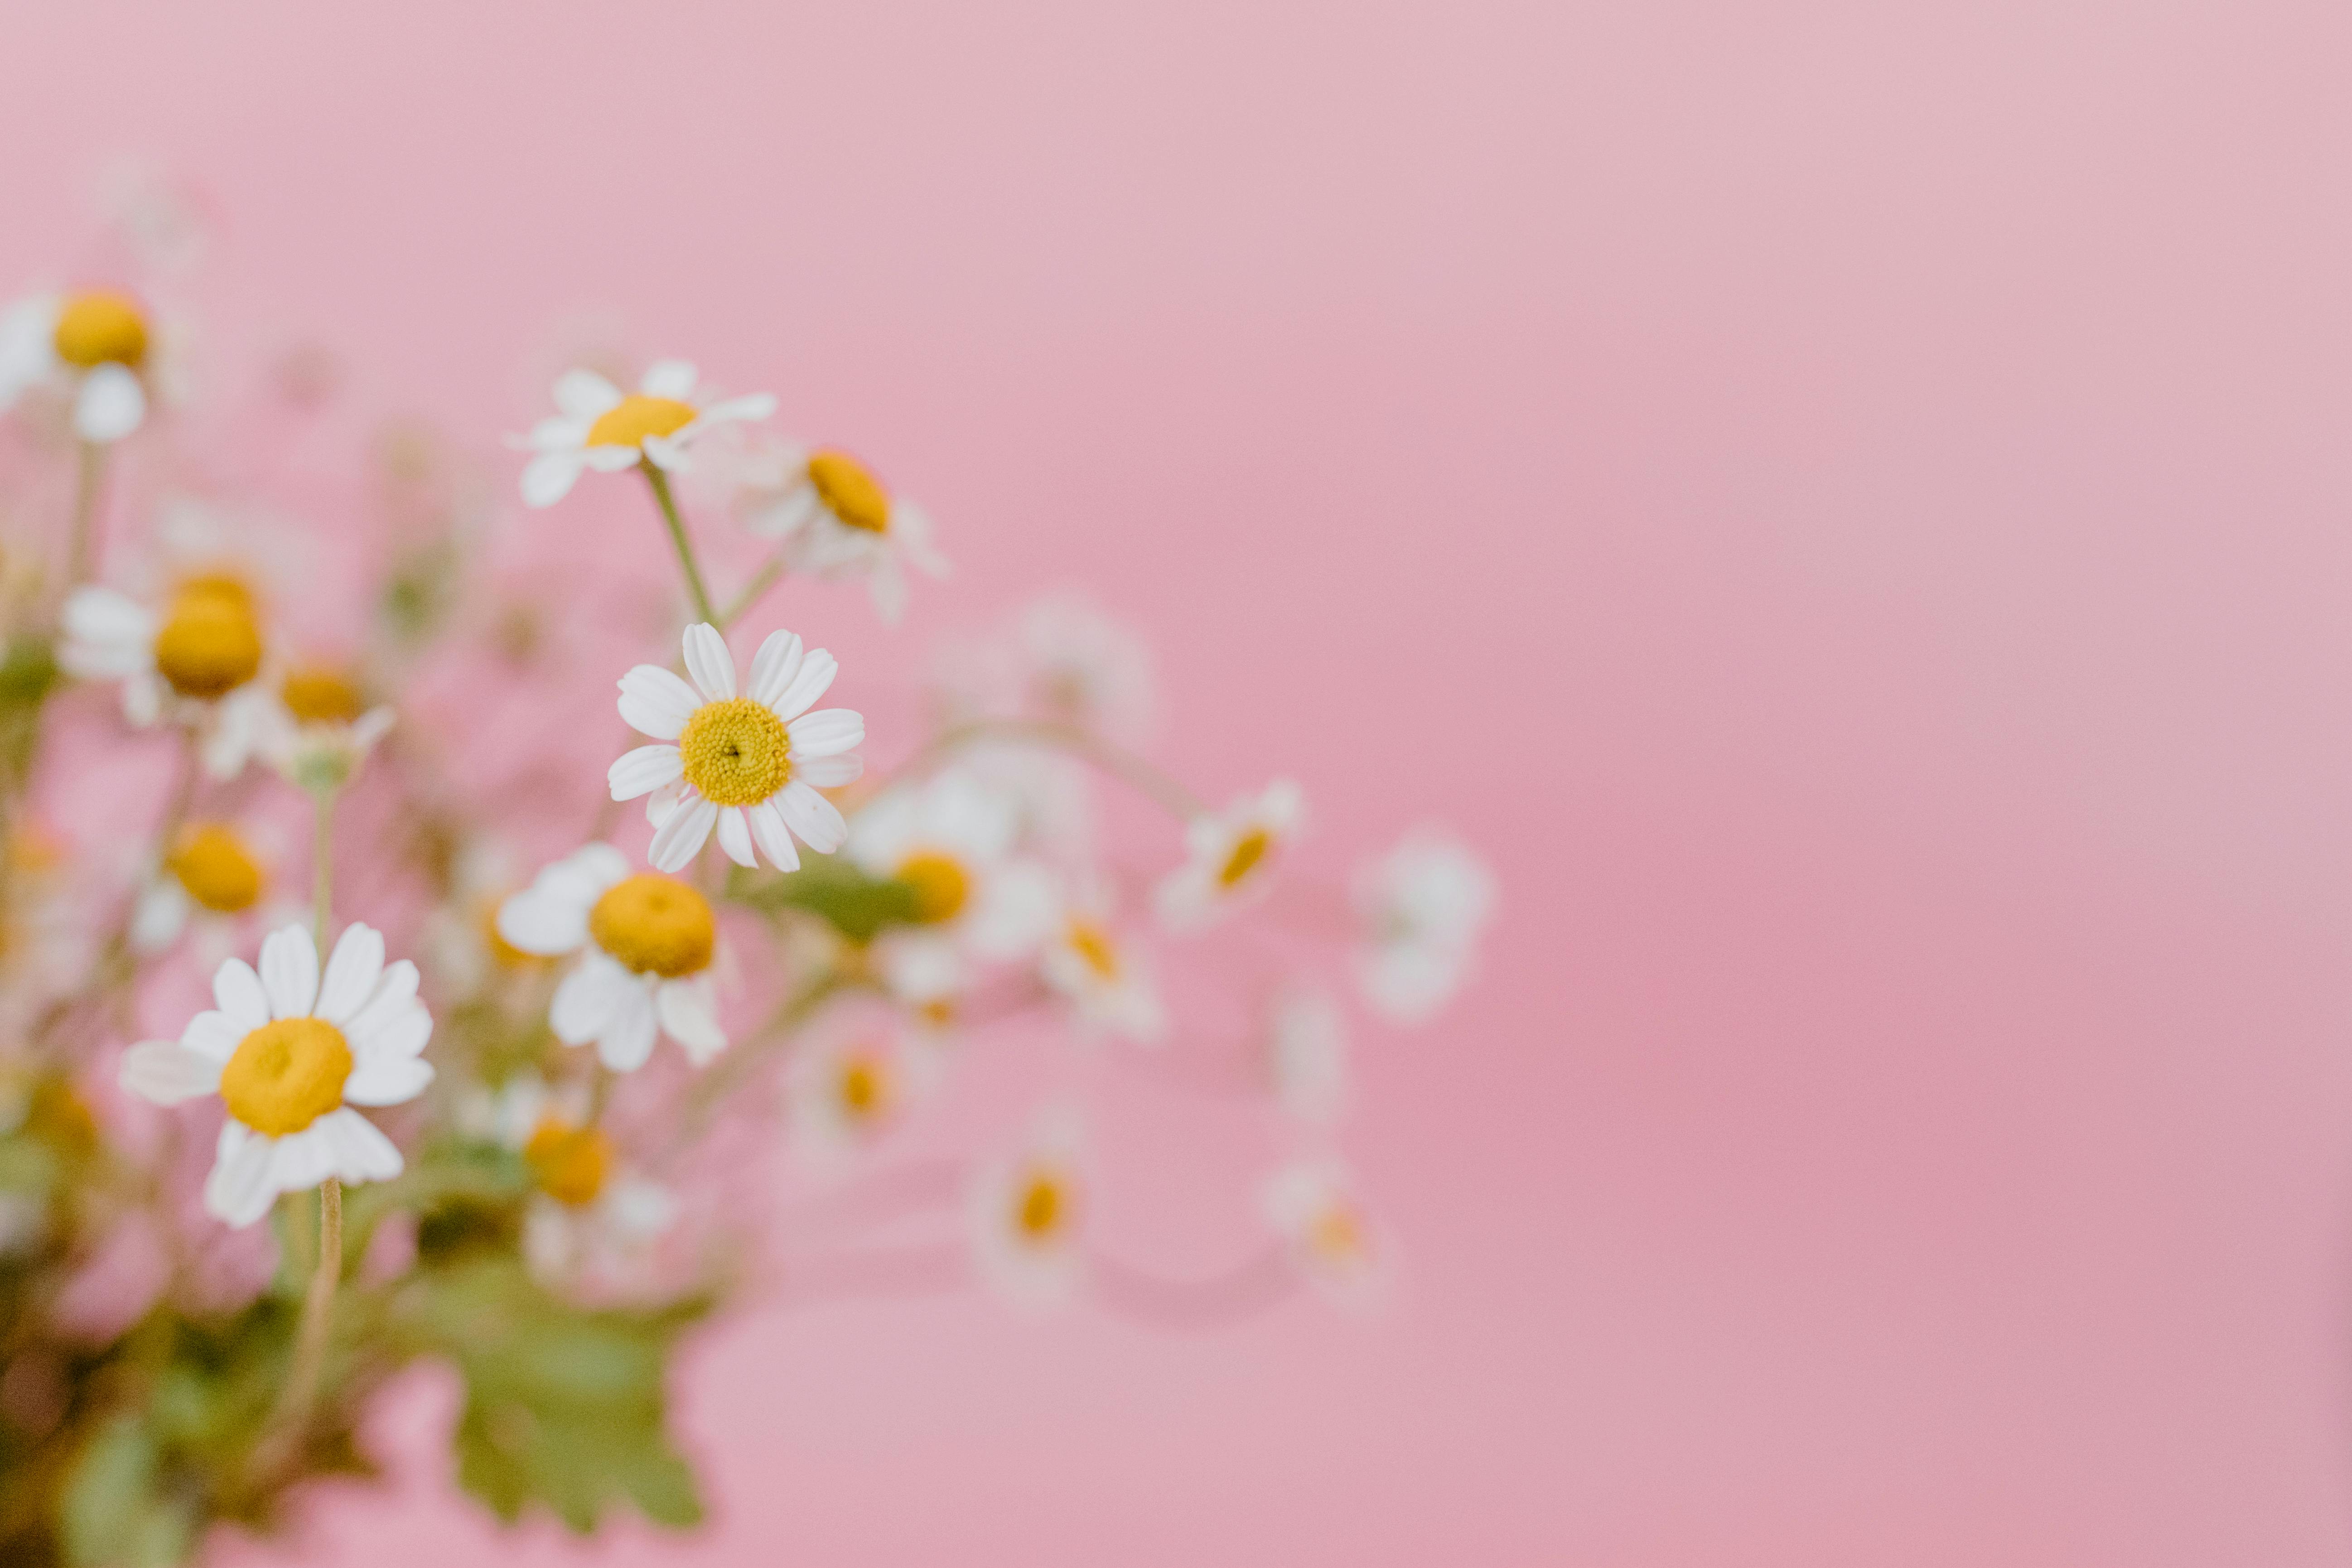 White and Yellow Flowers in Pink Background · Free Stock Photo